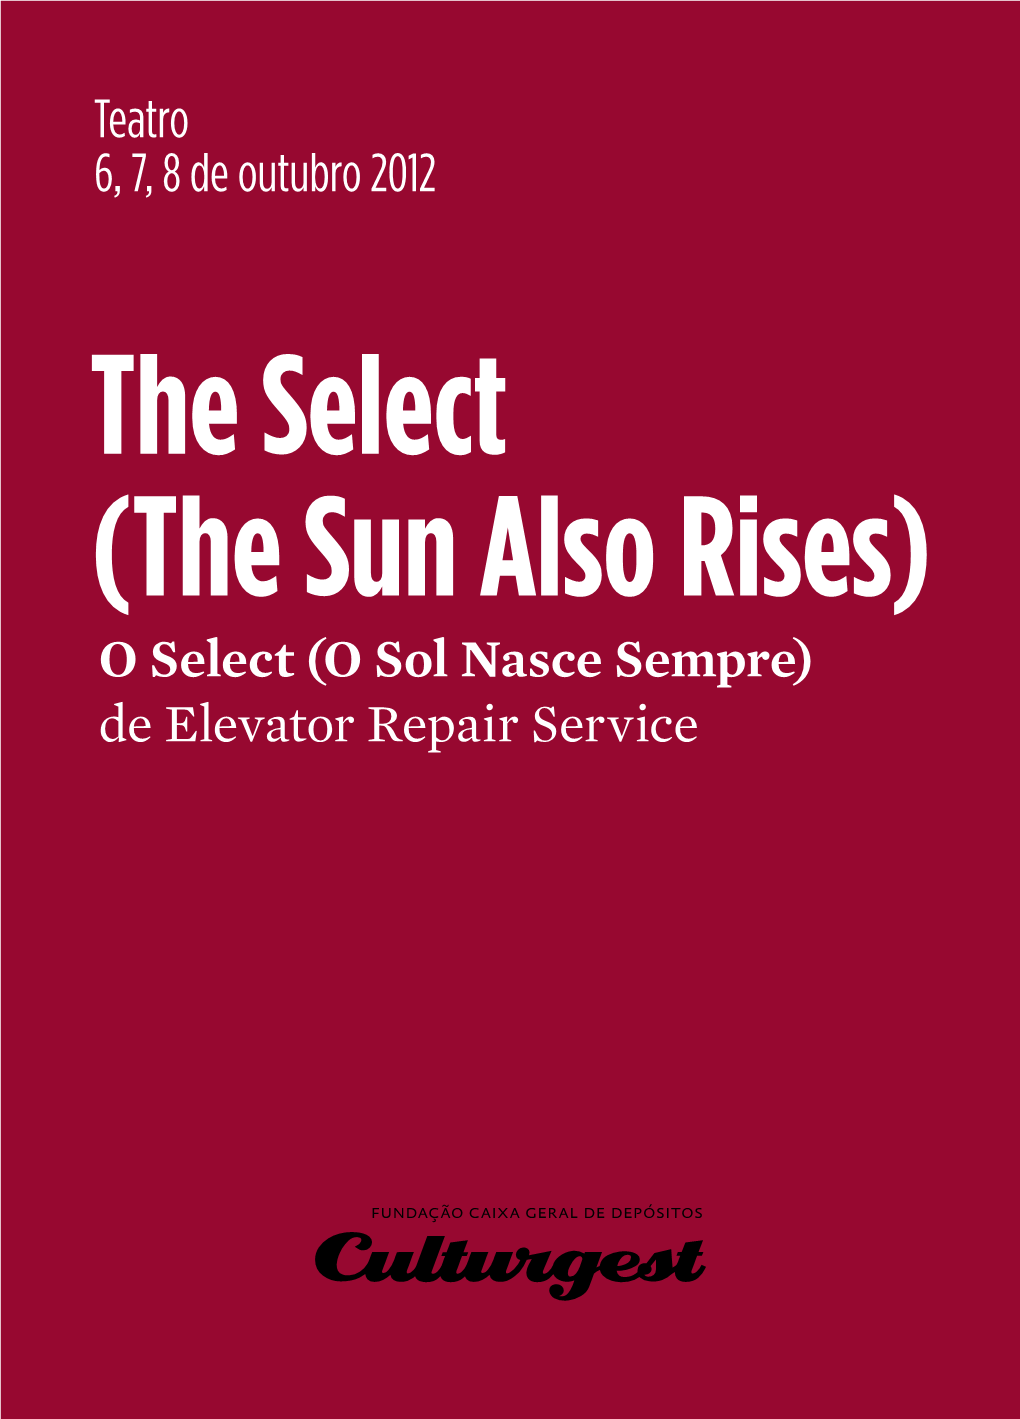 The Select (The Sun Also Rises)